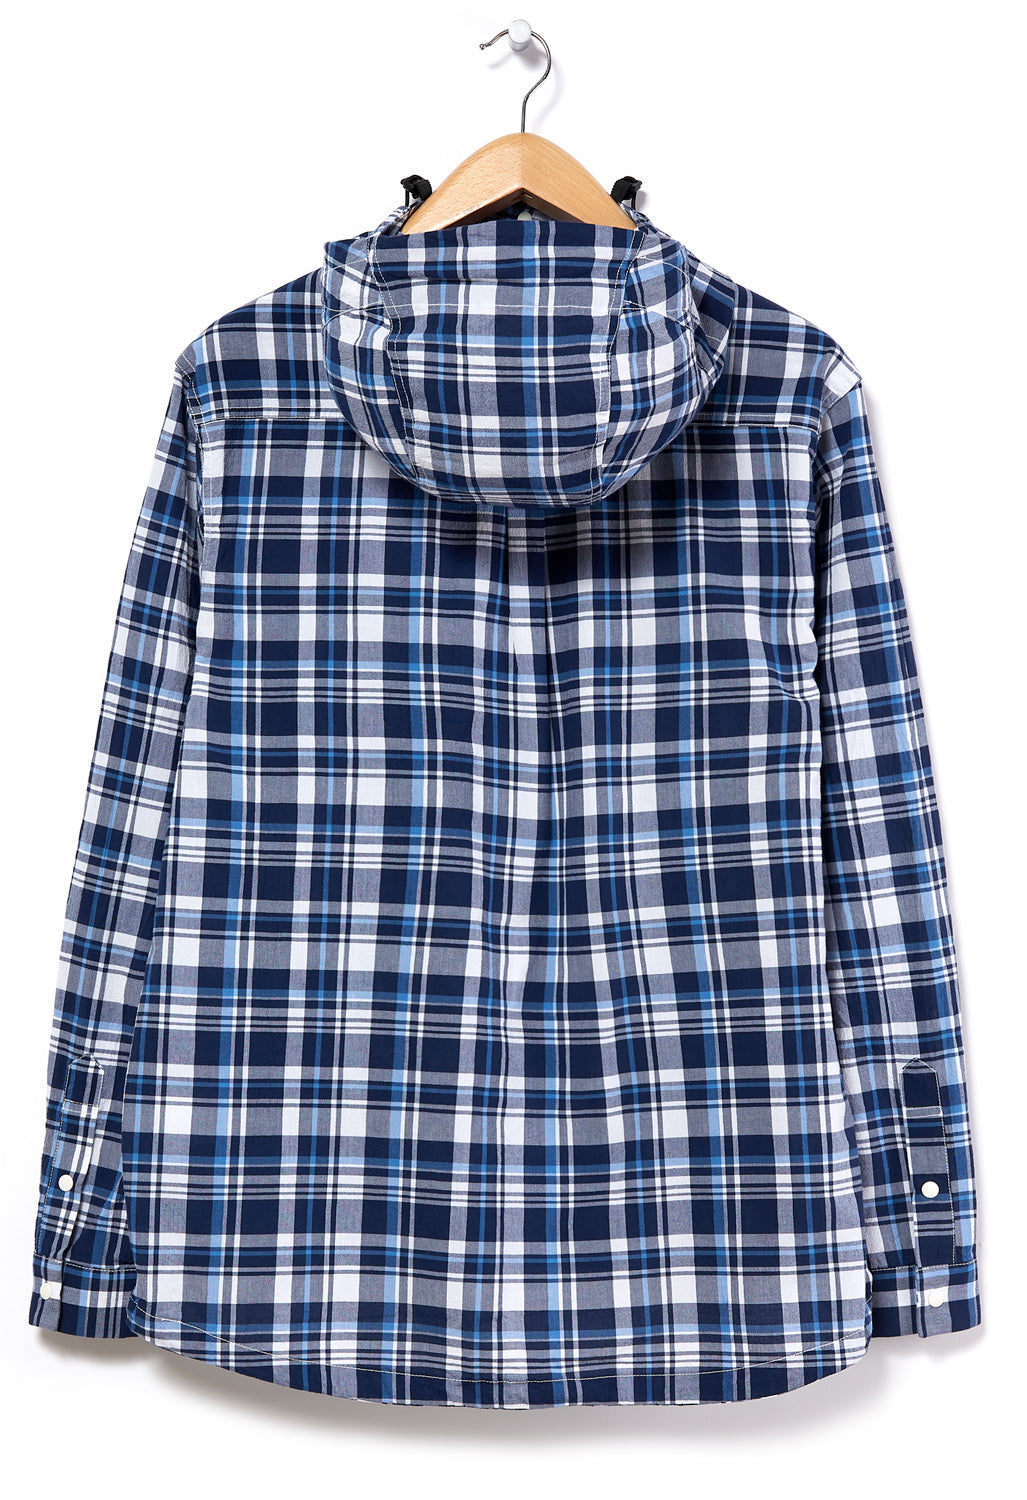 CAYL Men's Light Cotton Pullover Hoodie - Blue Check